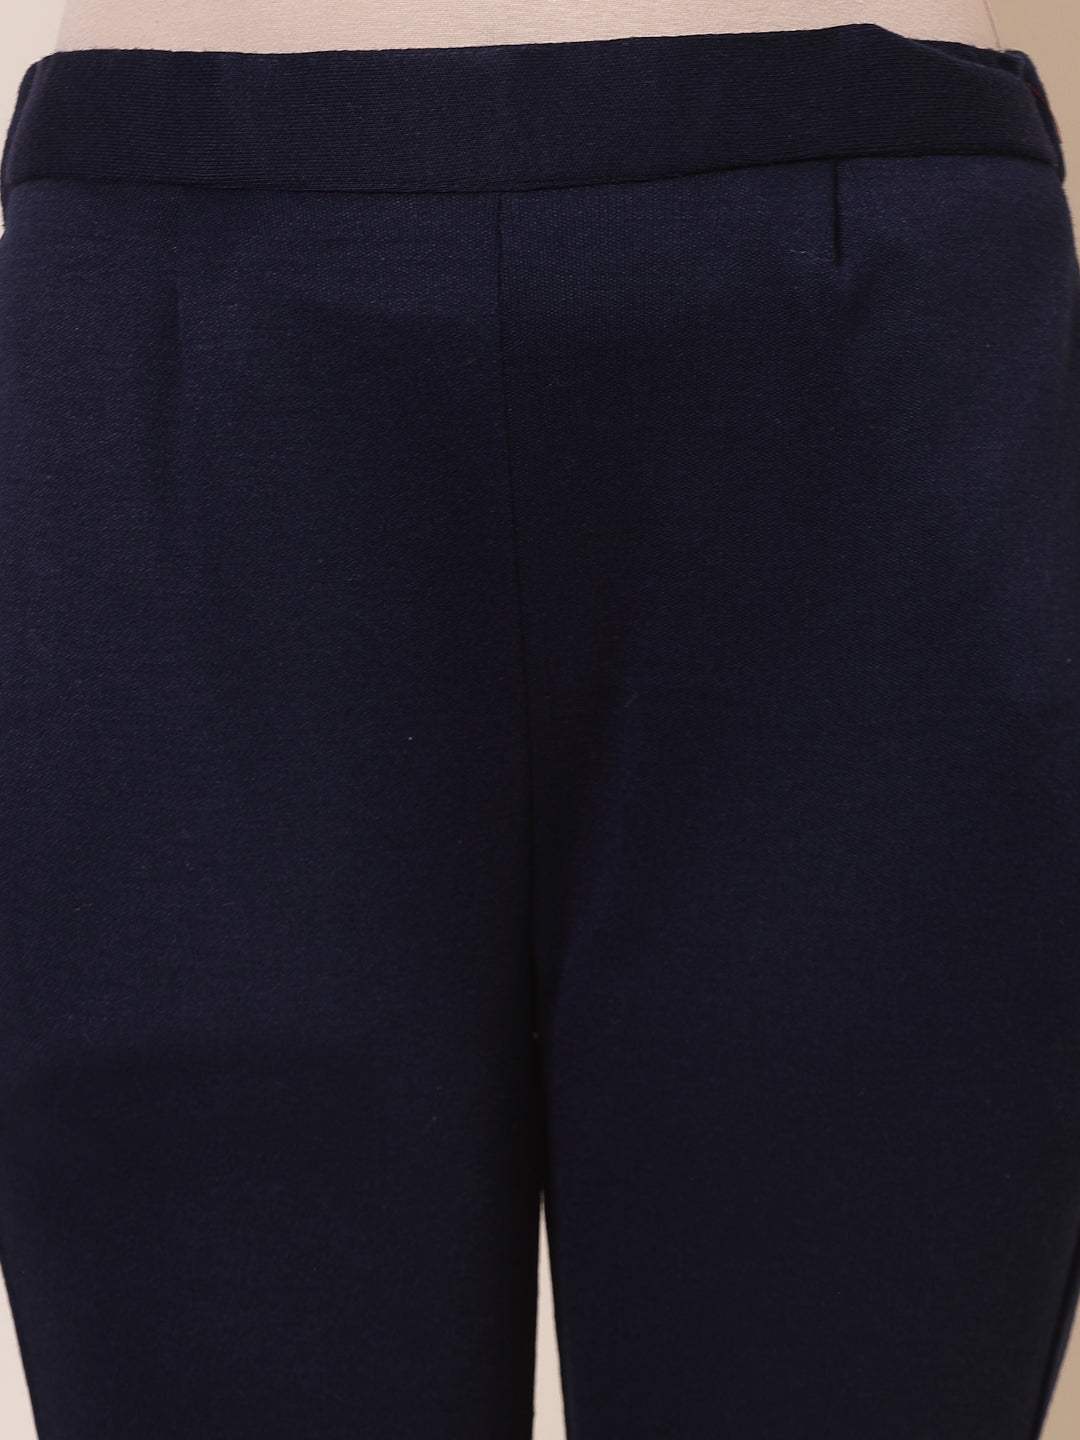 White & Navy Blue Solid Woollen Trouser (Pack of 2)